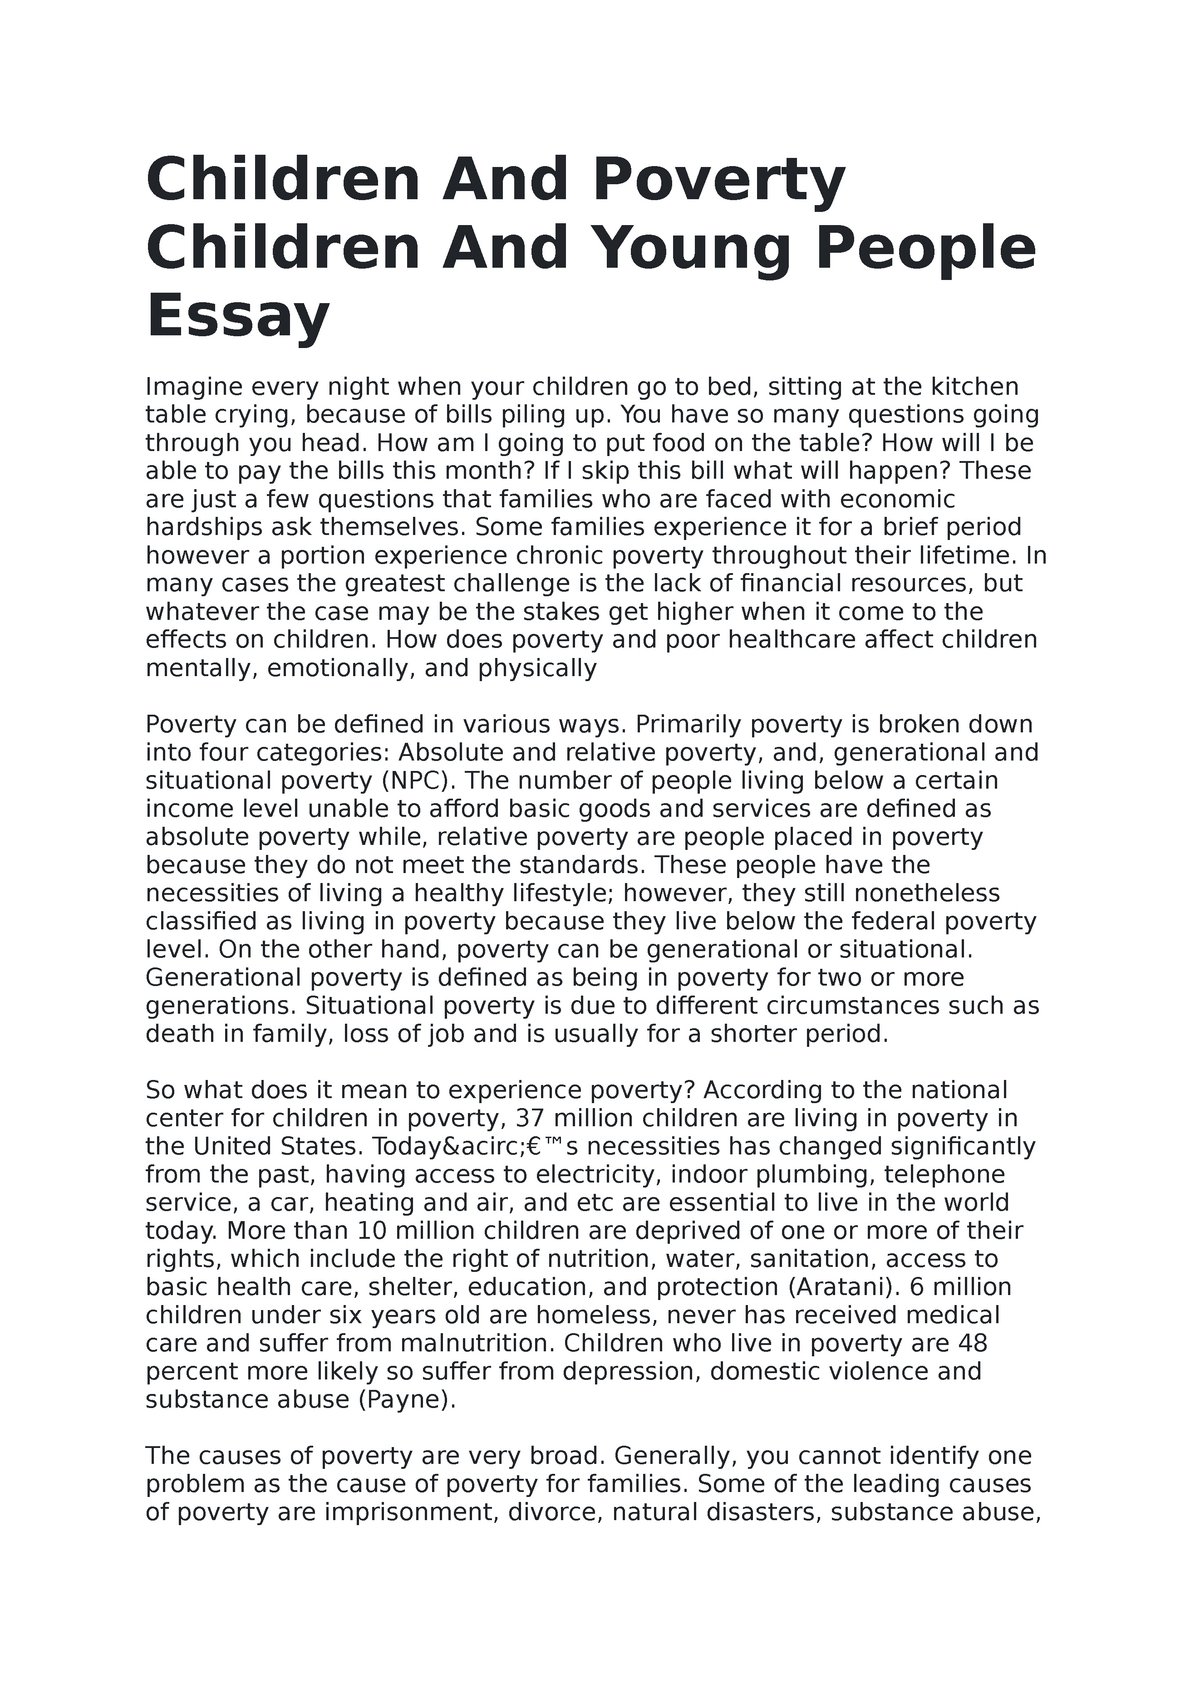 essay on poverty 1000 words